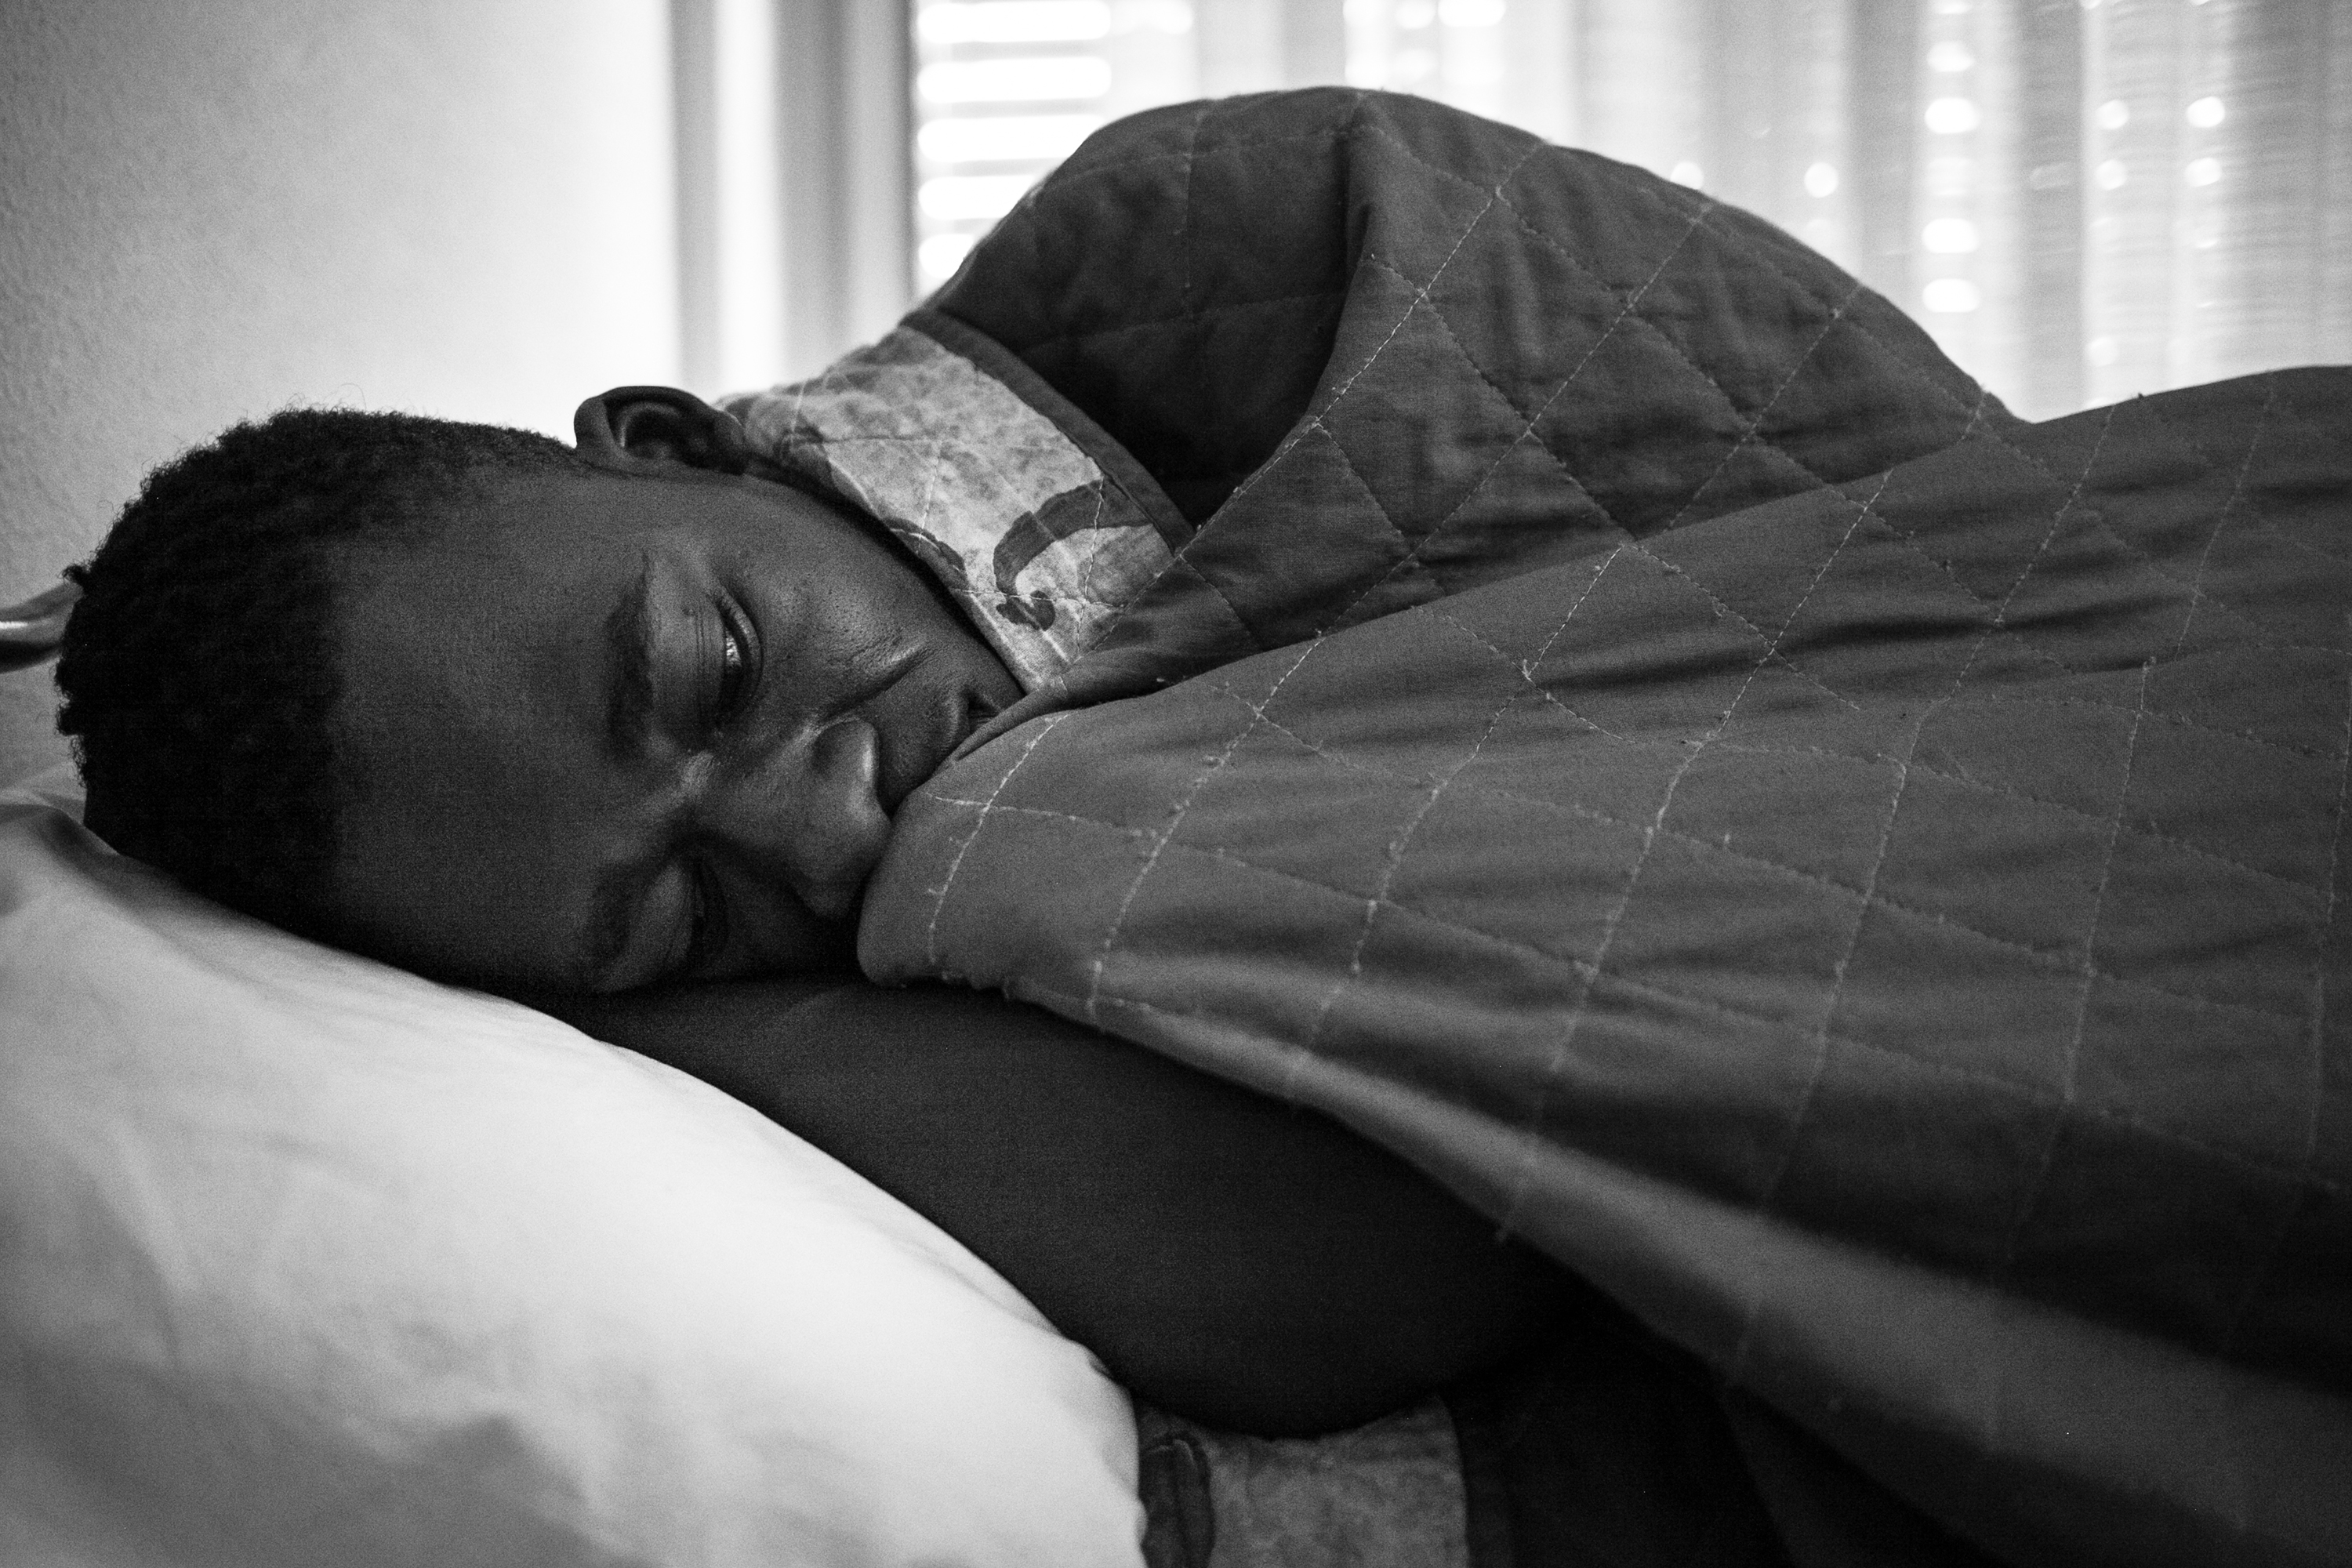 Malick lies on his bed in Hotel Colibri, in the city of Biella, where he lives since August 2016. He shares room with three more people from Gambia and Senegal. (Photo: César Dezfuli)